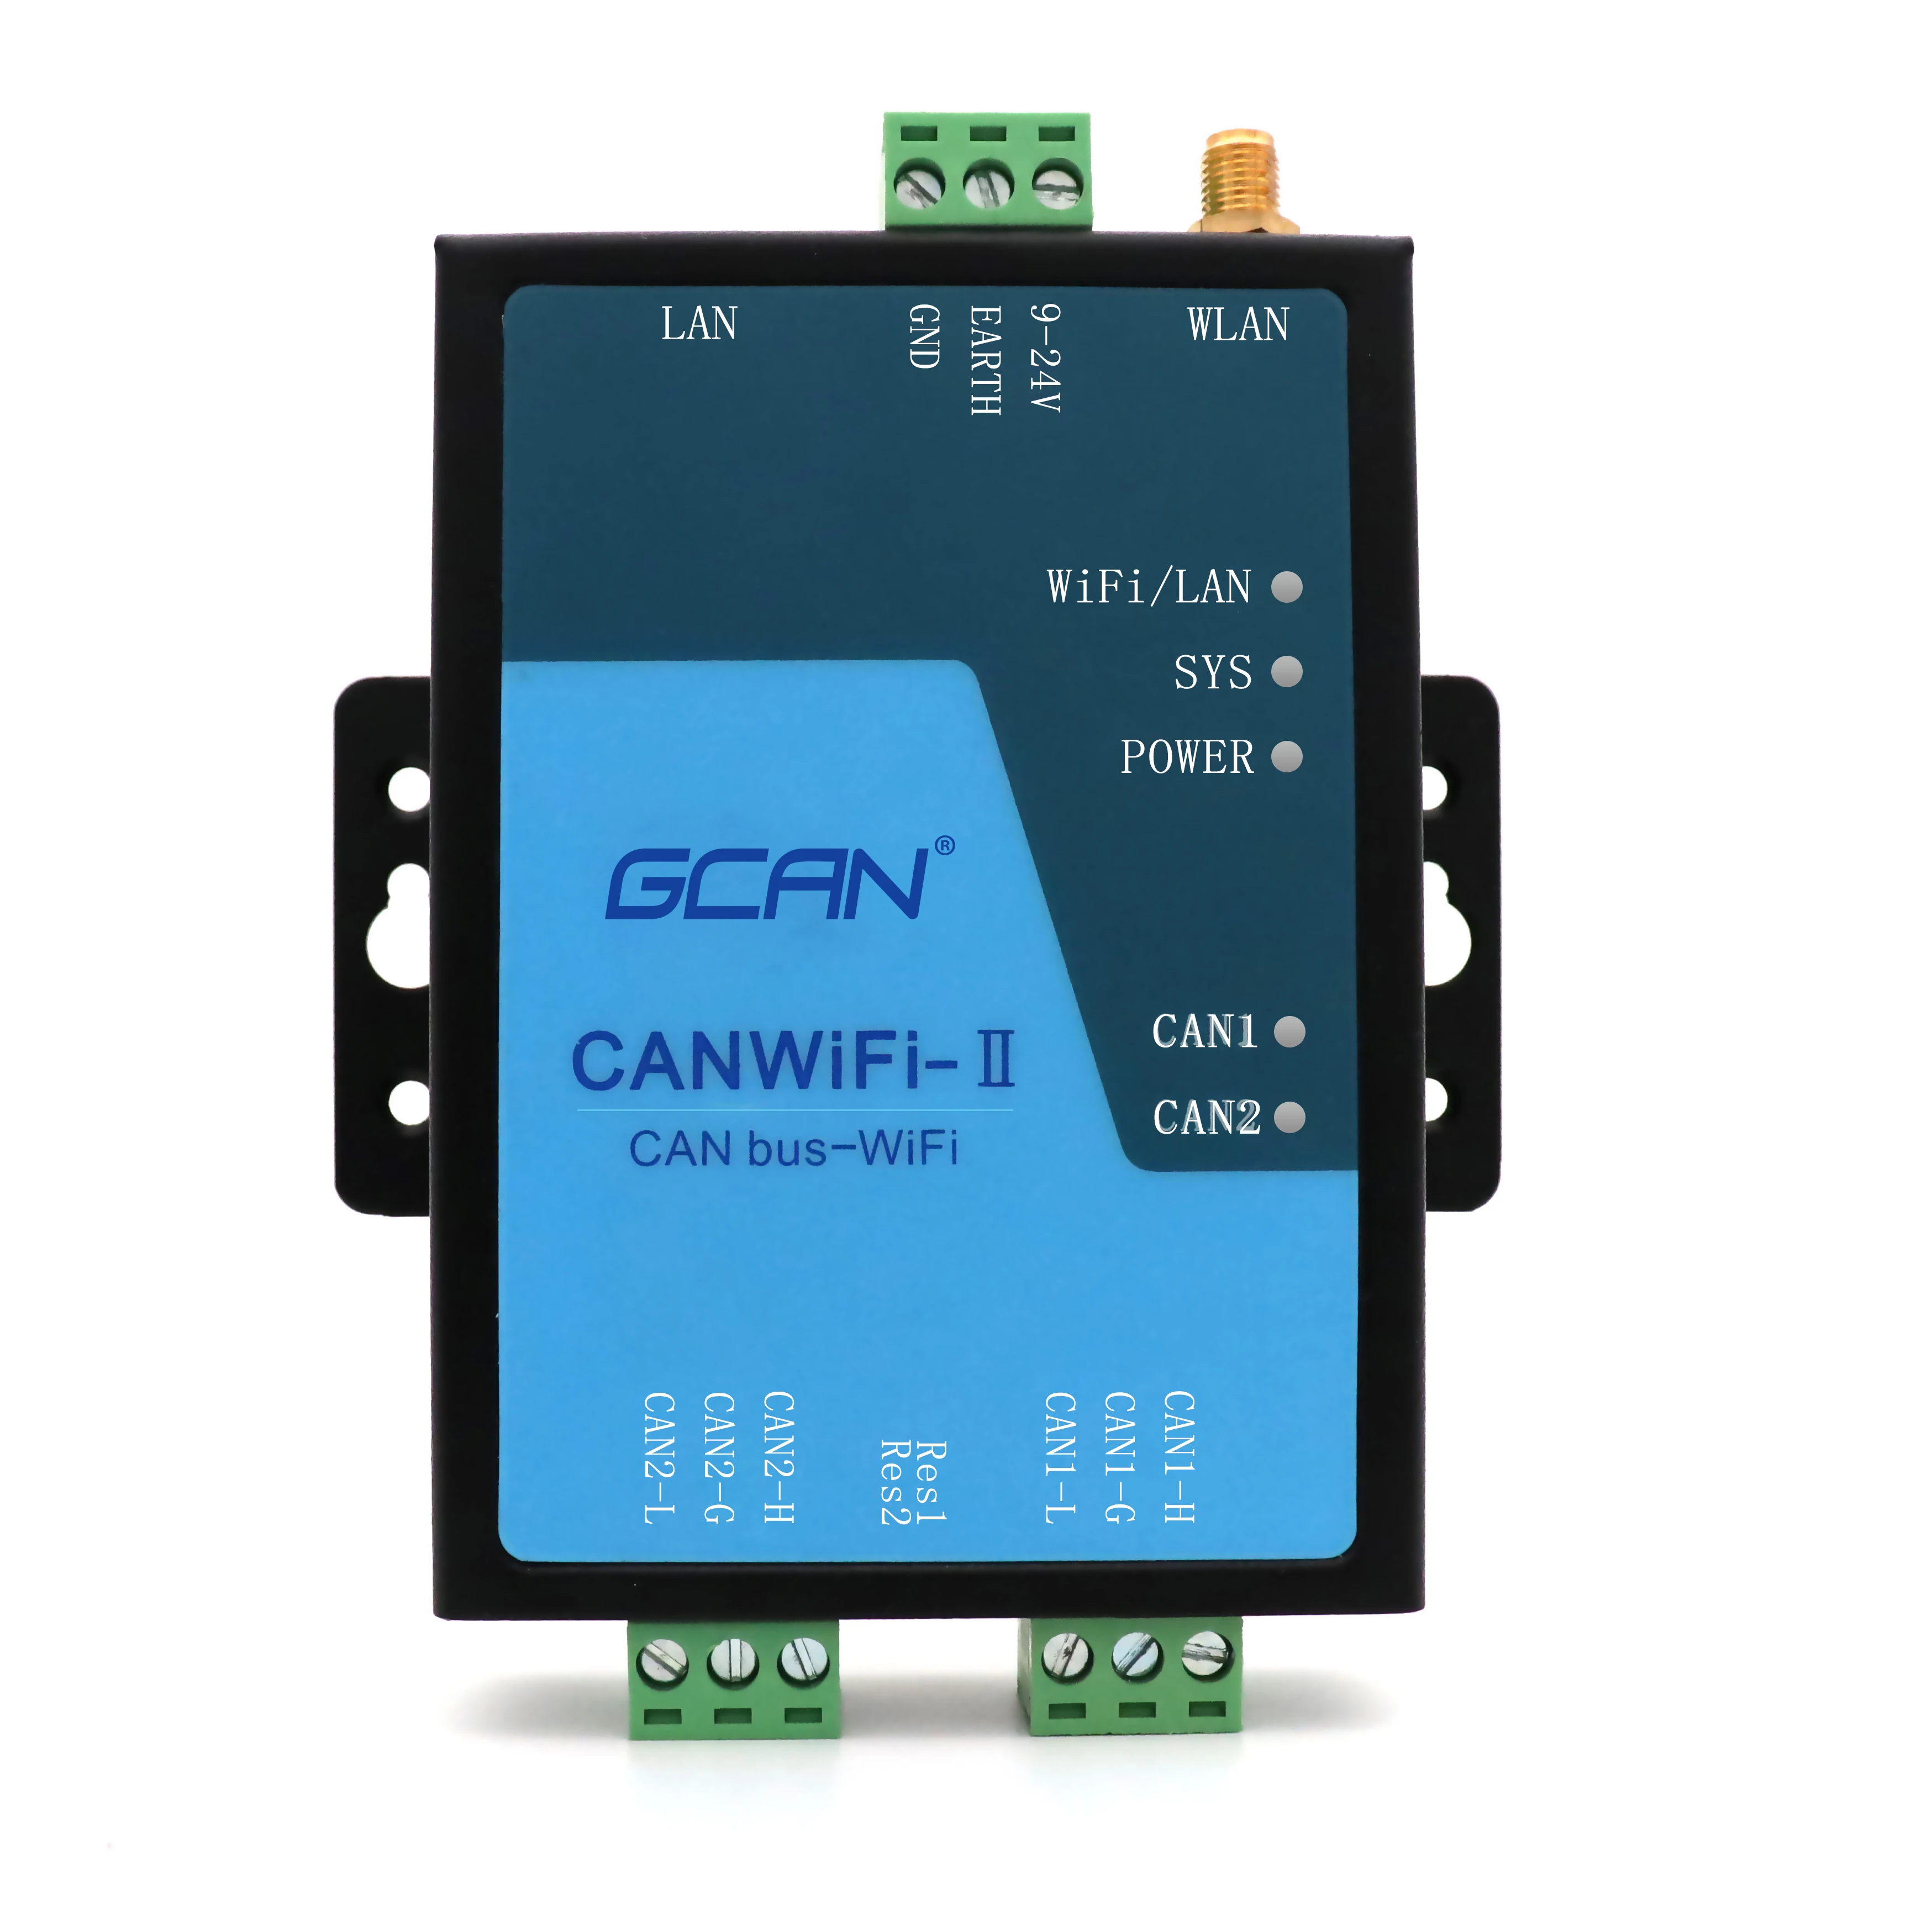 

GCAN-211 Integrates 2.4G WLAN Interface, Complies With IEEE802.11A/B/G Standards And Supports Secondary Development.